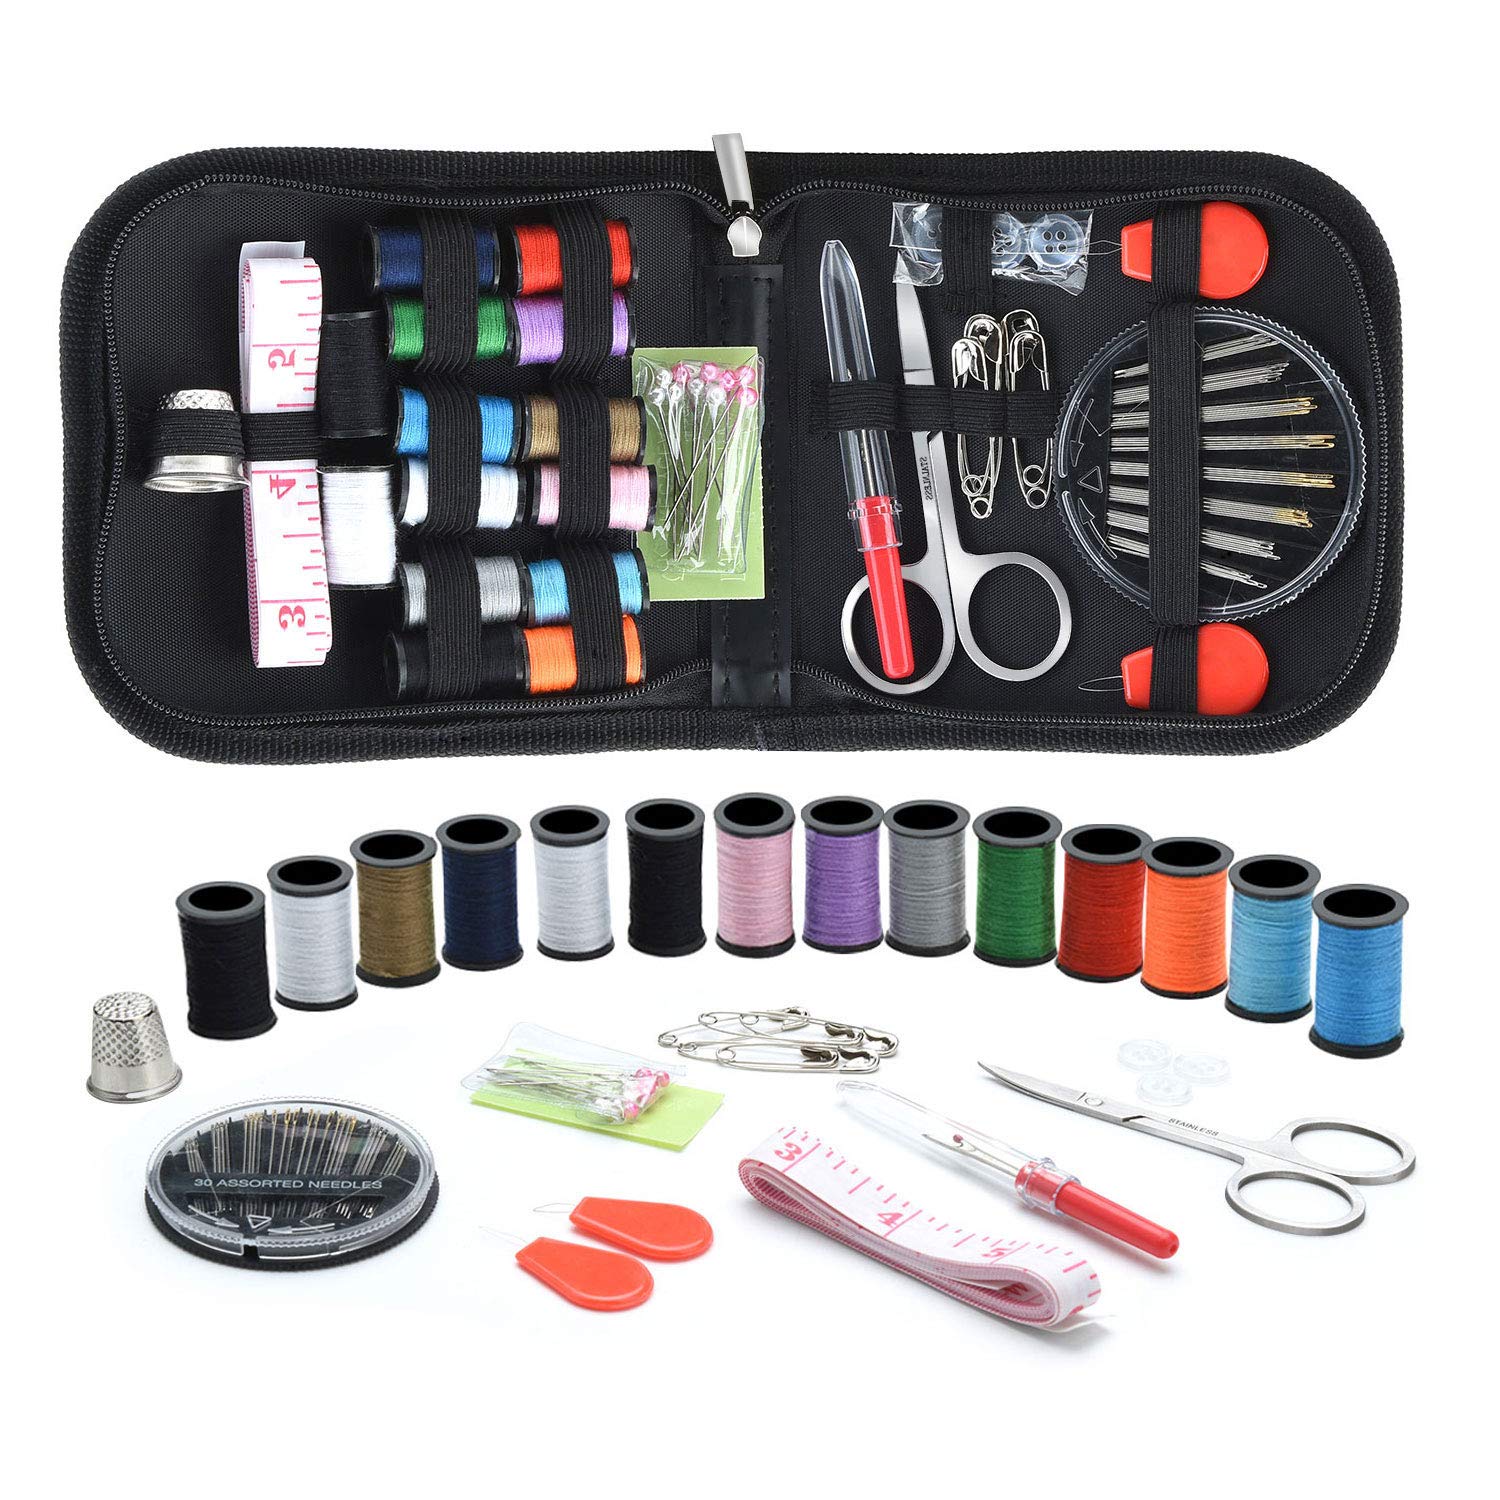 Marcoon Sewing KIT, DIY Sewing Supplies with Sewing Accessories, Portable  Mini Sewing Kit for Beginner, Traveller and Emergency Clothing